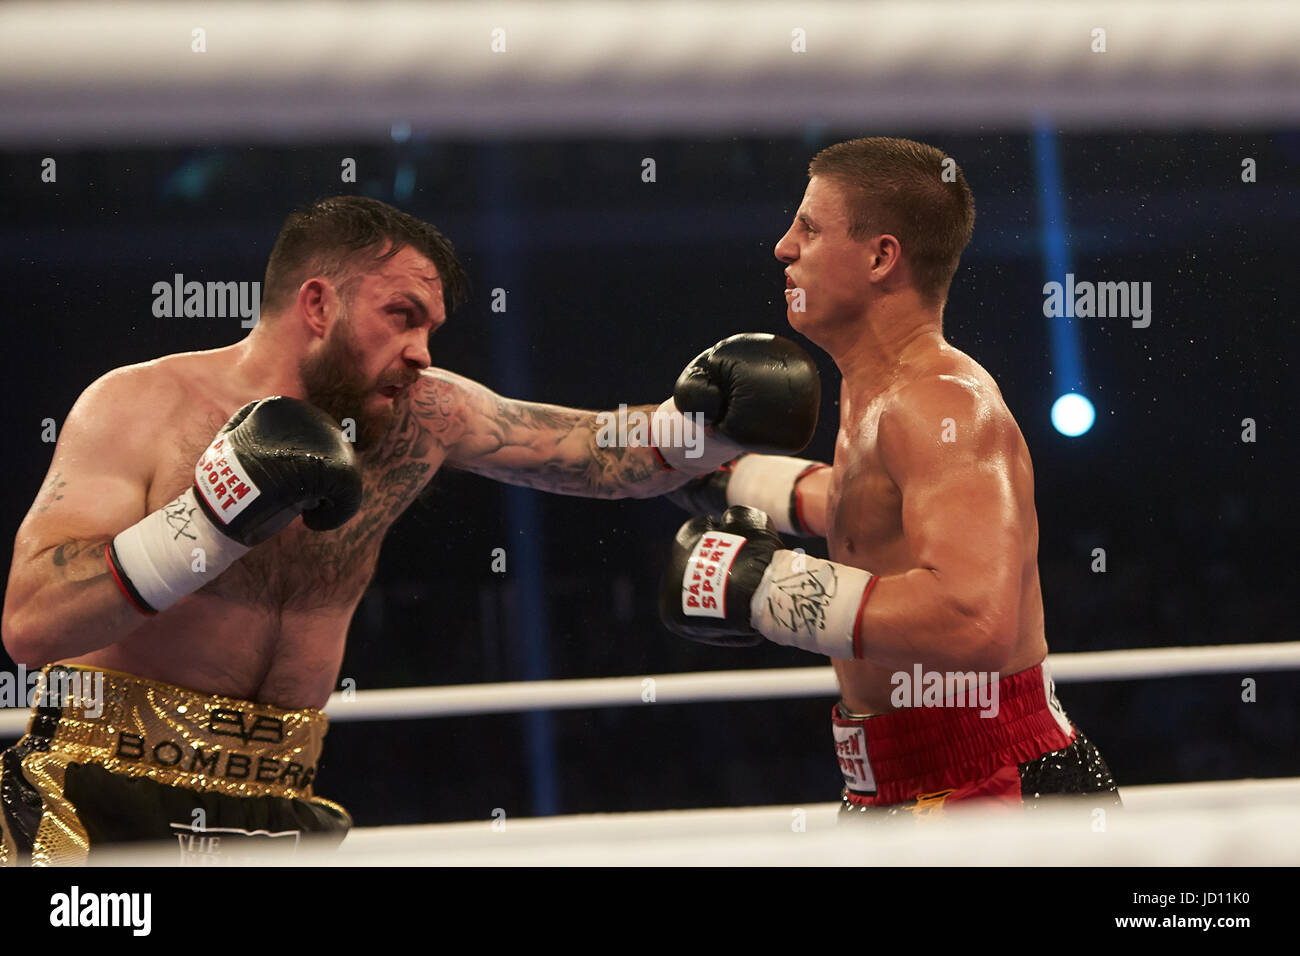 Page 2 - Paul Smith Boxing High Resolution Stock Photography and Images -  Alamy